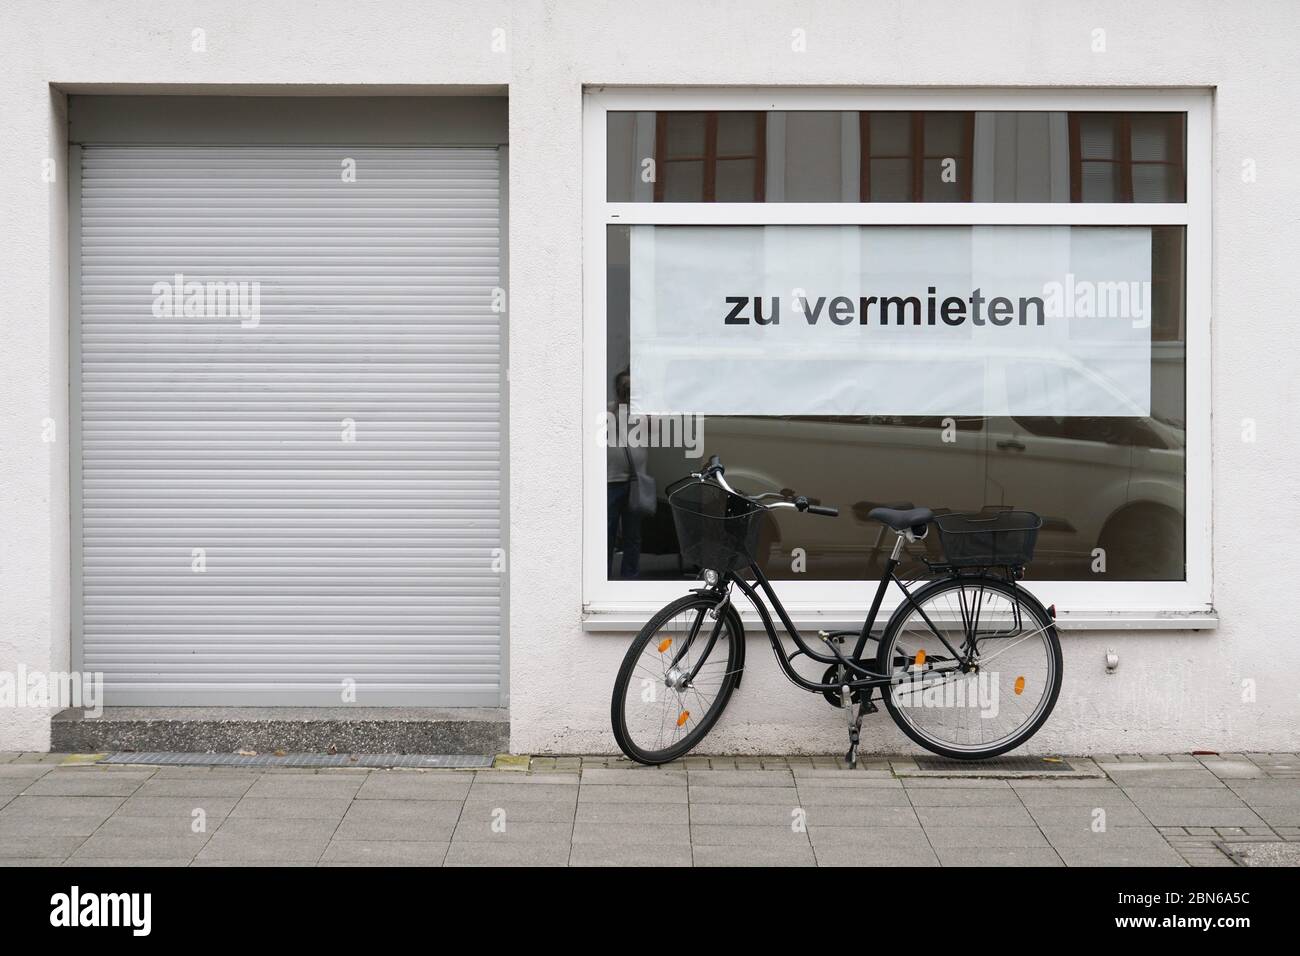 German vacancy sign in store window - zu vermieten translates as for rent or to let - bicycle parked outside closed shop Stock Photo